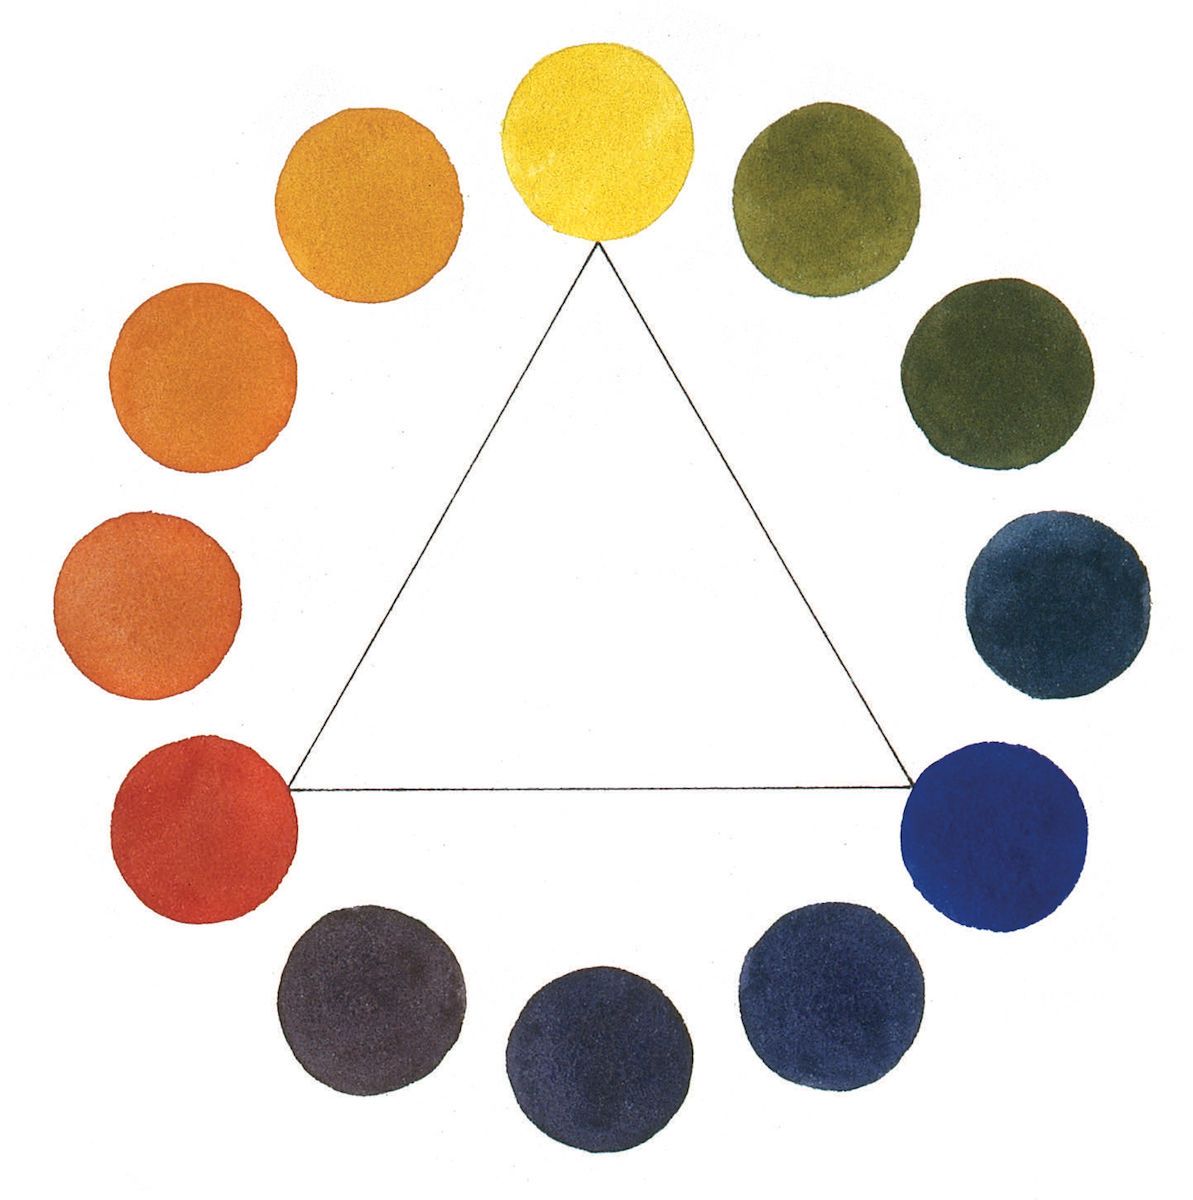 The 30-color palette used for the multi-sensory color code